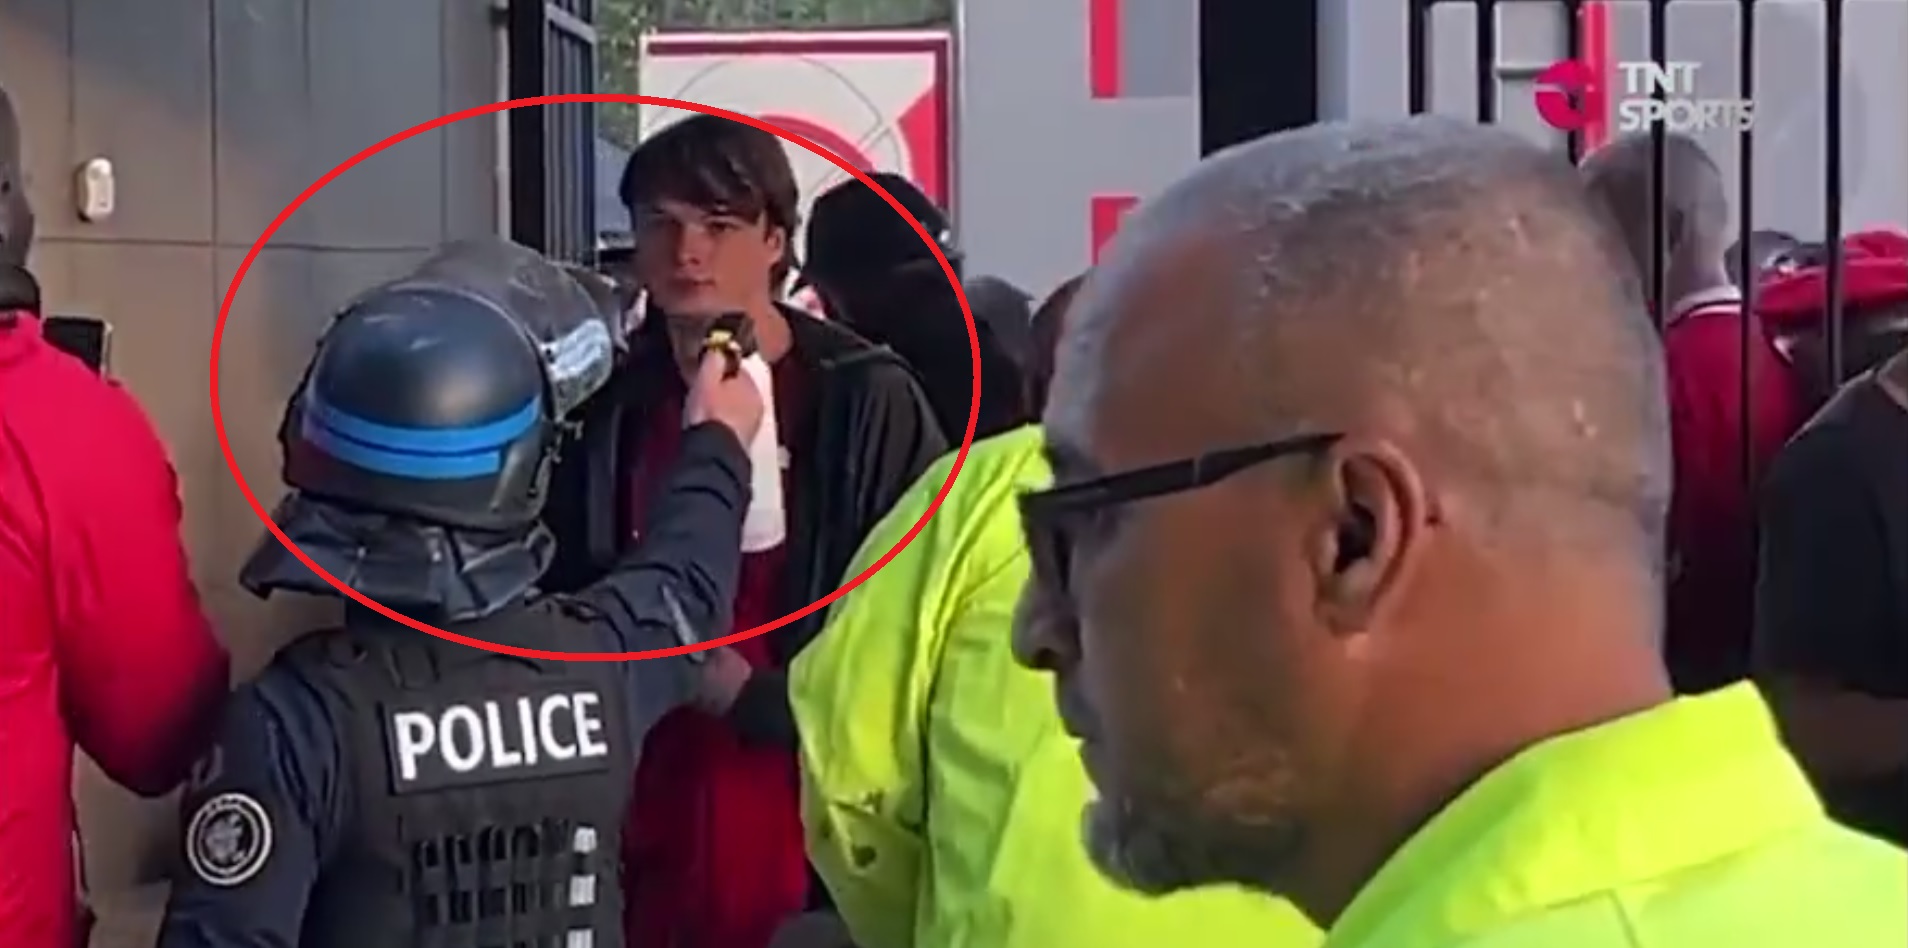 (Video) French police officer hits Liverpool fan from close range with pepper spray in the face despite showing no aggression